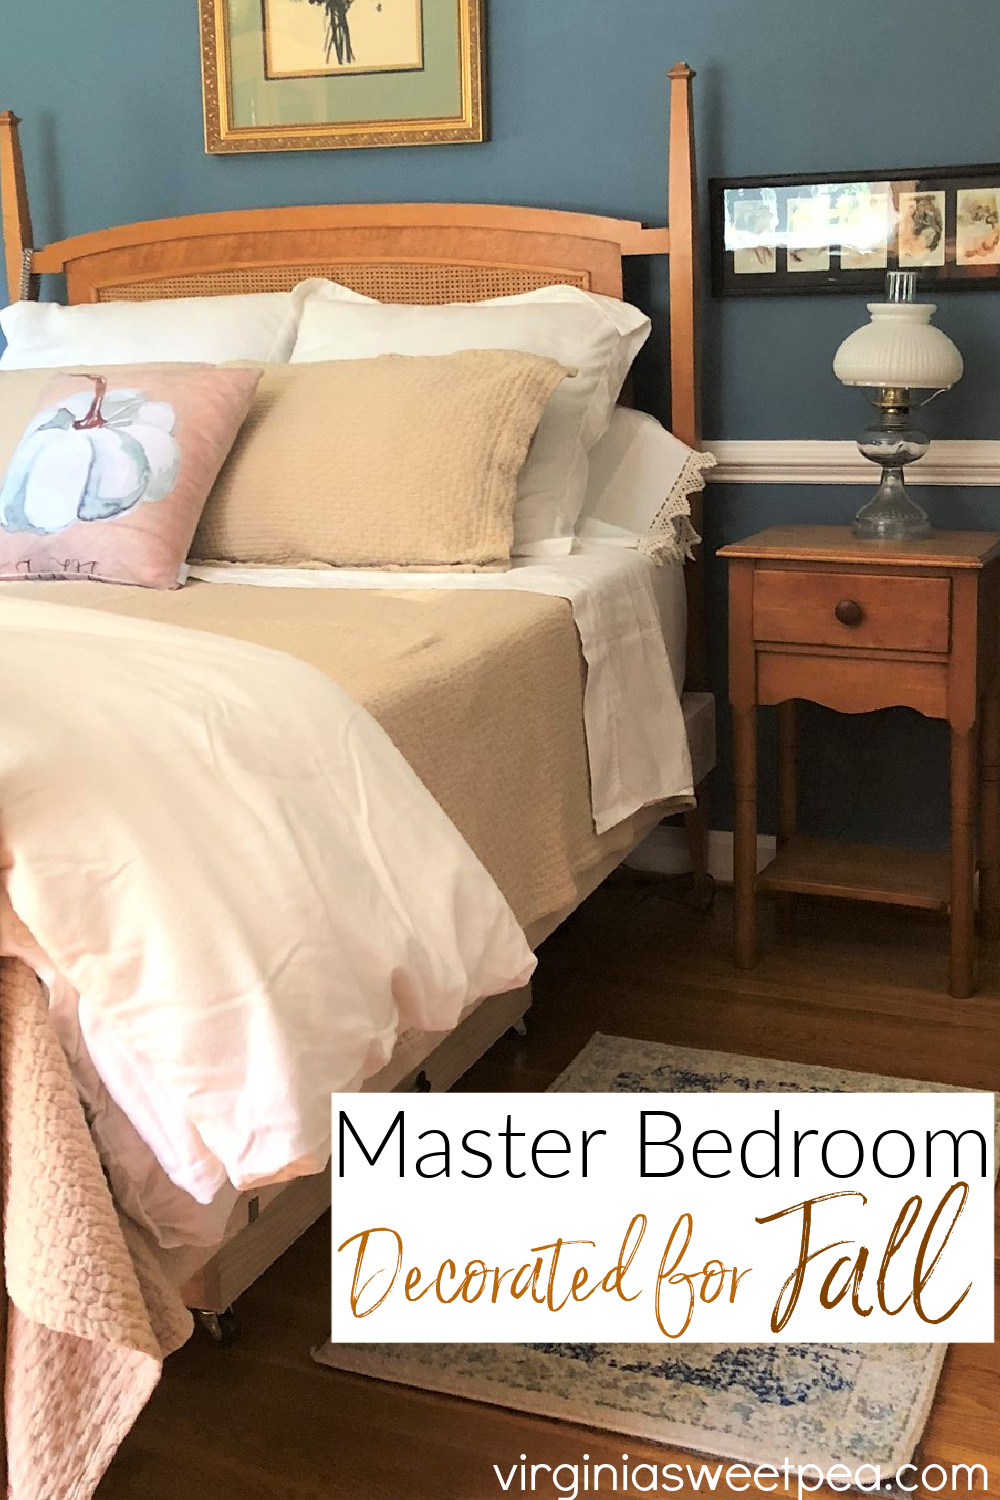 Master Bedroom Decorated for Fall Sweet Pea